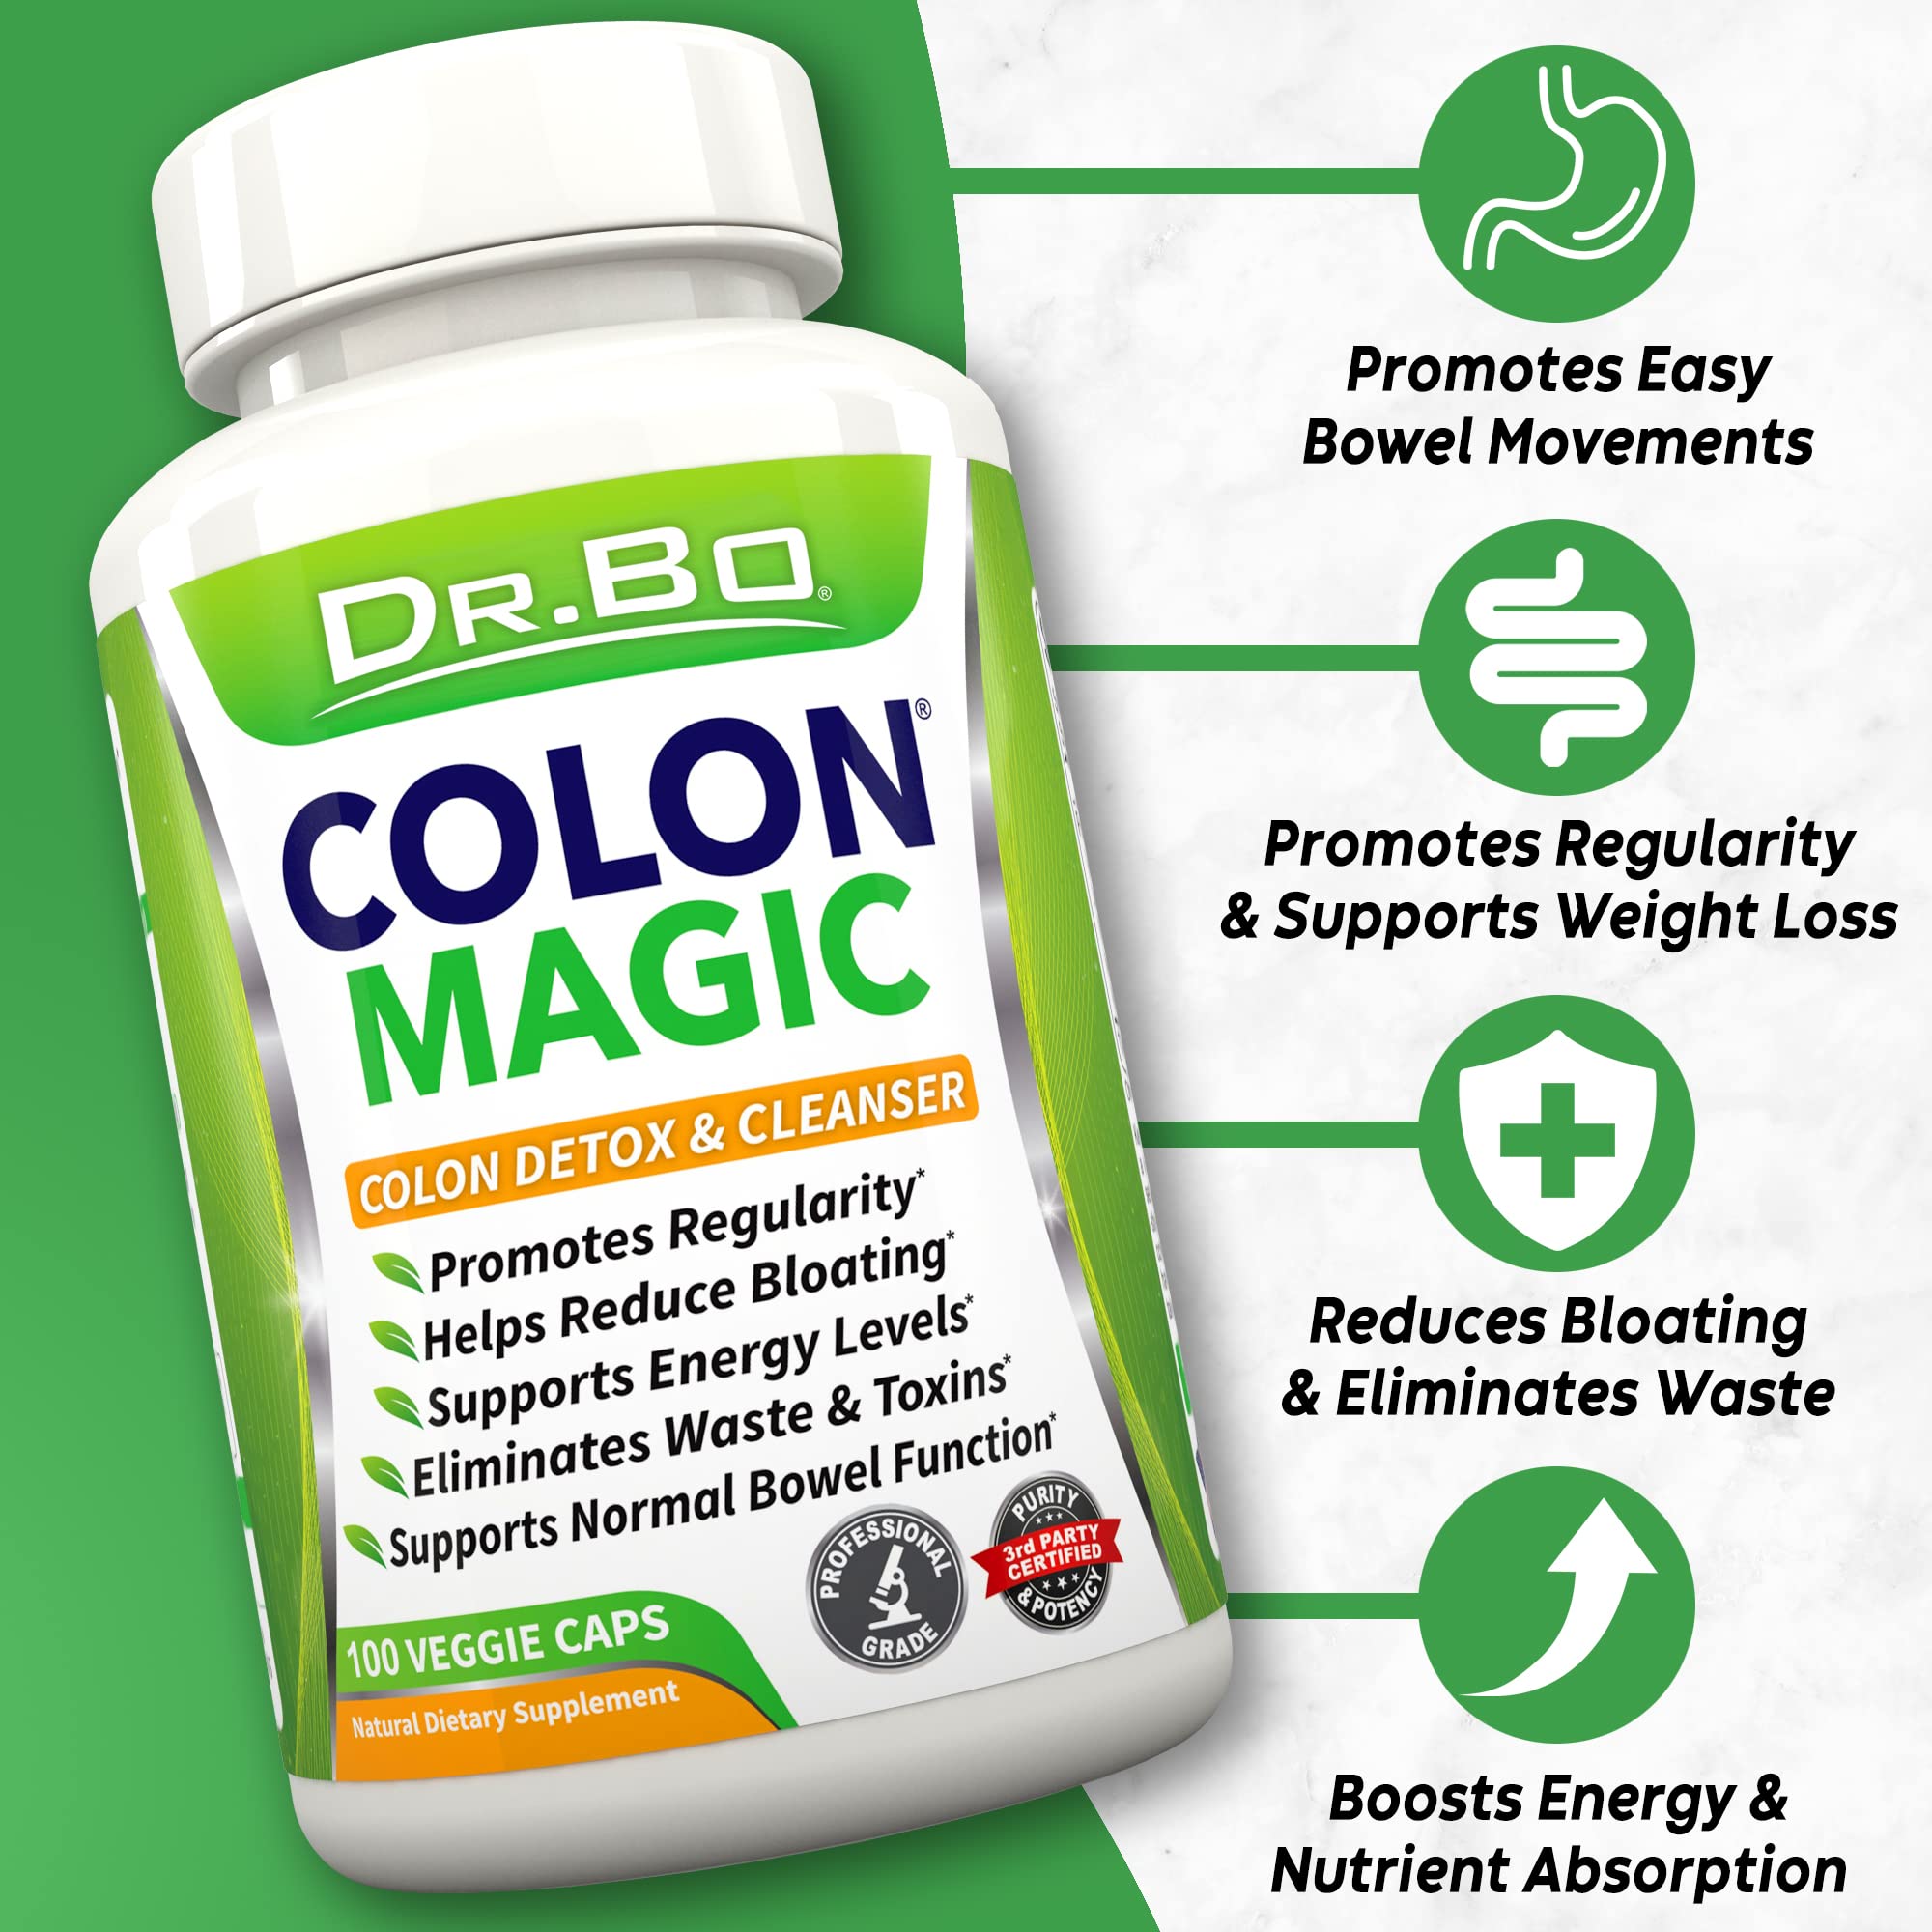 Colon Cleanse Detox Formula - Natural Bowel Cleanser Pills for Intestinal Bloating & Fast Digestive Cleansing - Daily Constipation Relief Supplement Gut, Belly, Stomach - Women Men Herbal Weight Flush